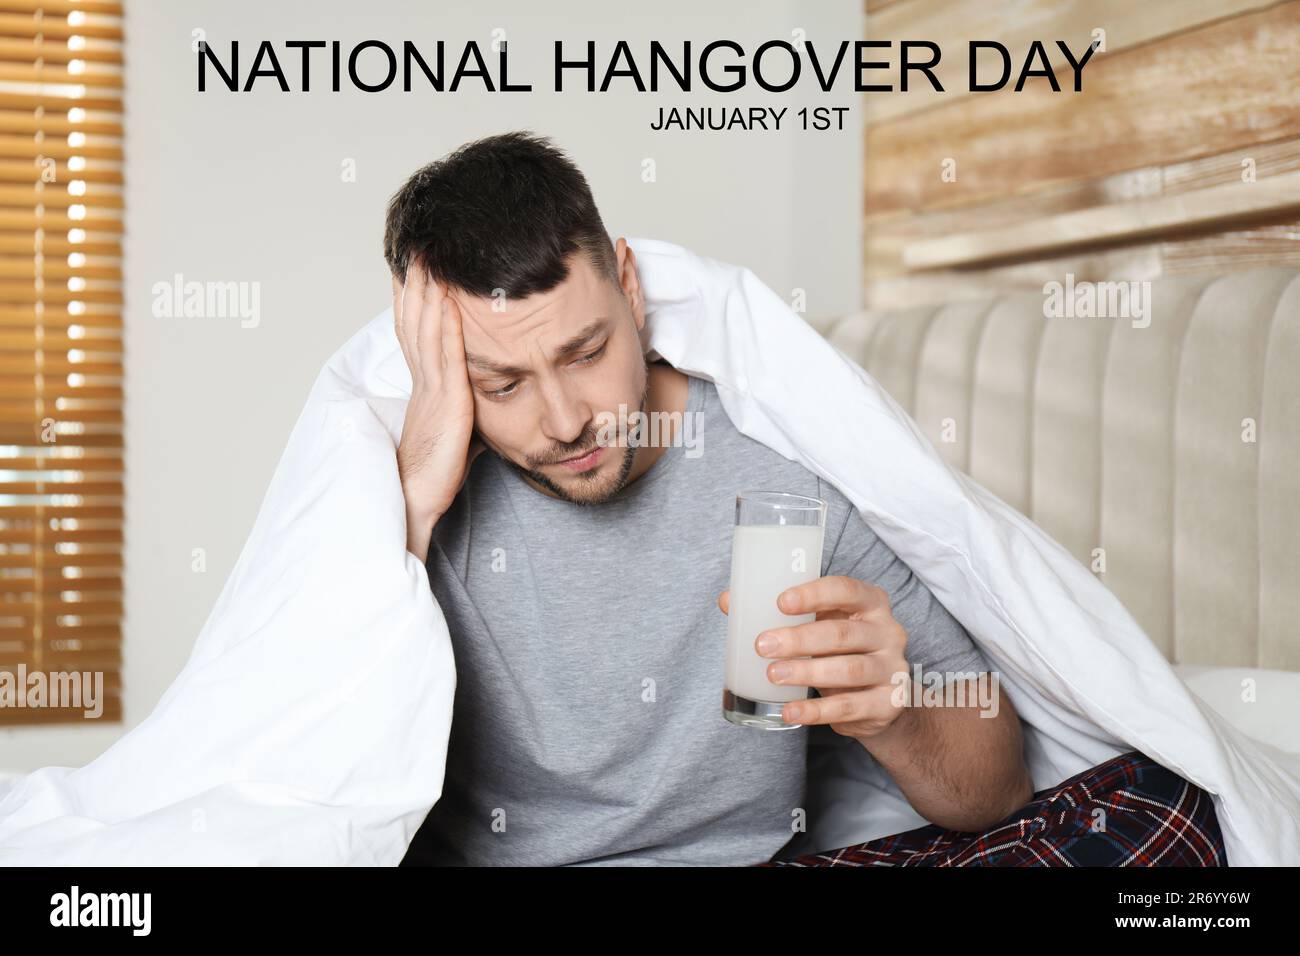 National hangover day - January 1st. Man taking remedy to relieve effects of alcohol consumption at home Stock Photo